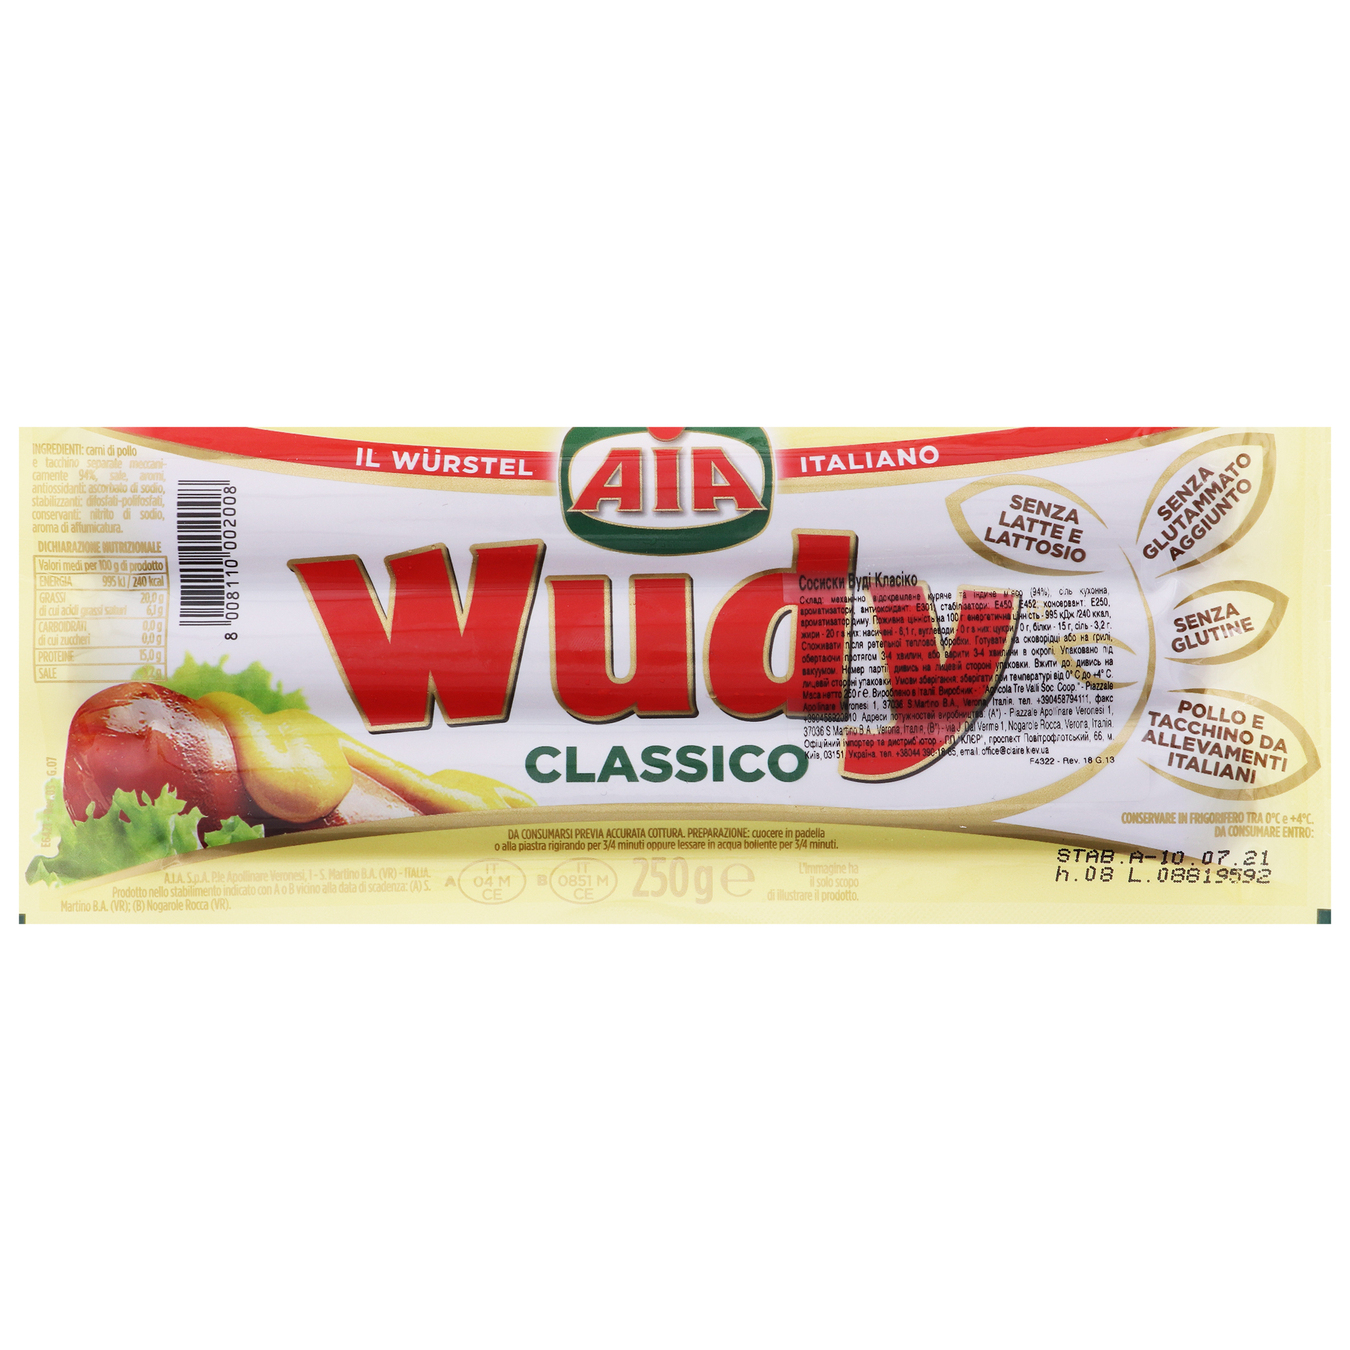 AIA Wudy Classico Sausages 250g 2